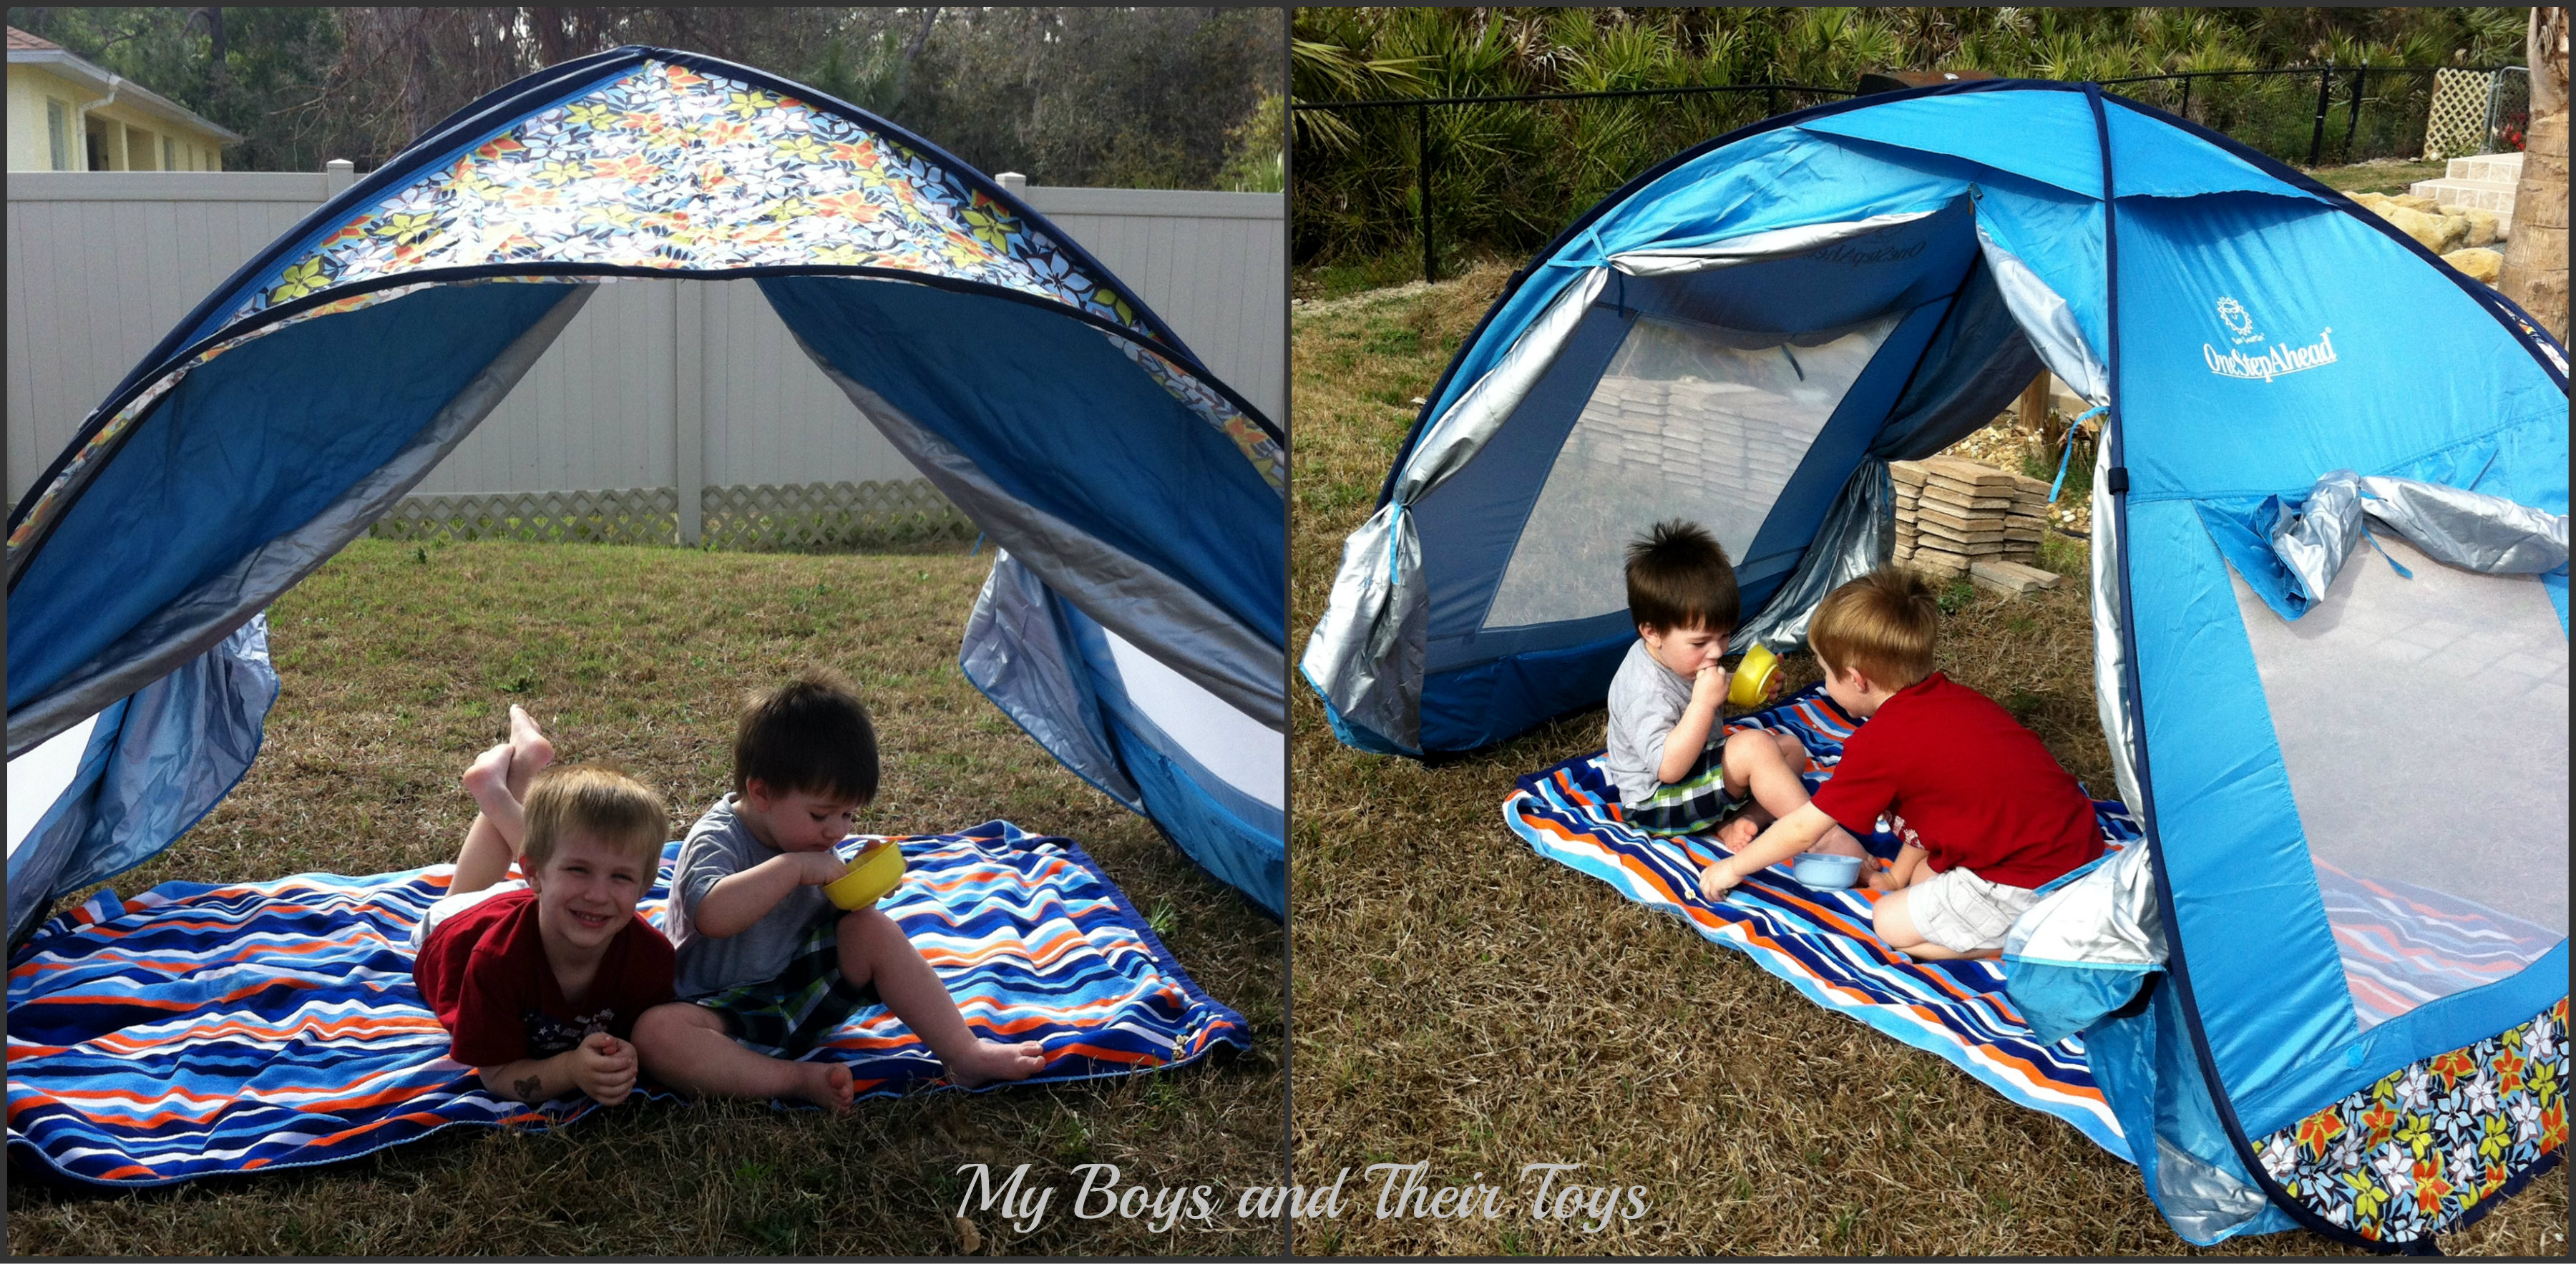 How To Keep Your Family Cool With The Sun Smarties Beach Cabana